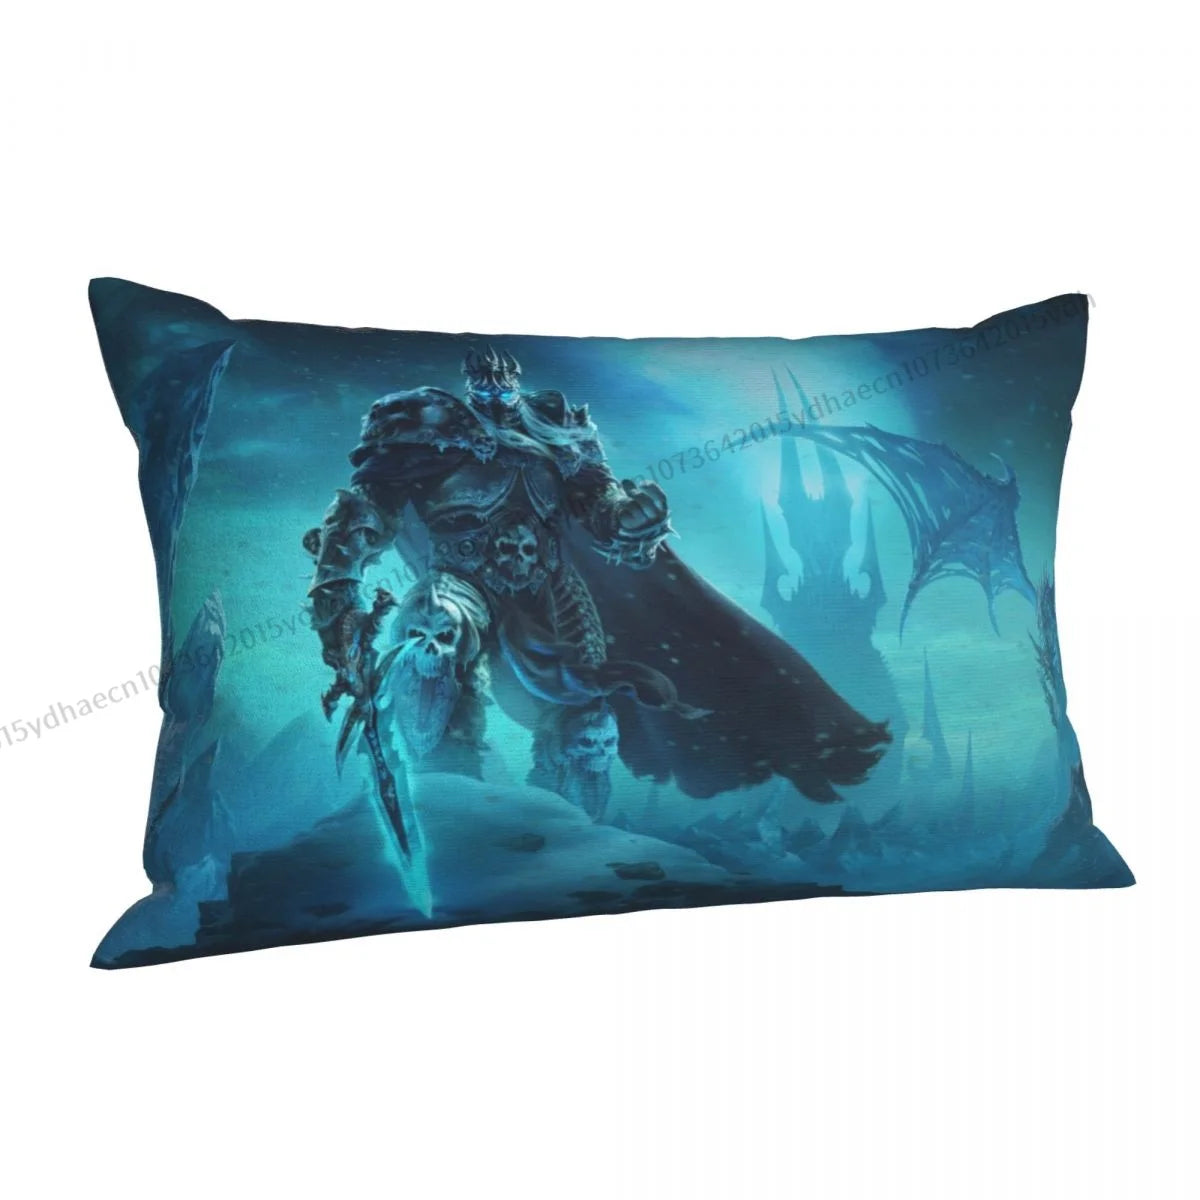 Lich-King Printed Pillow Case World Of Warcraft Backpack Cushions Covers Soft Sofa Decor Pillowcase